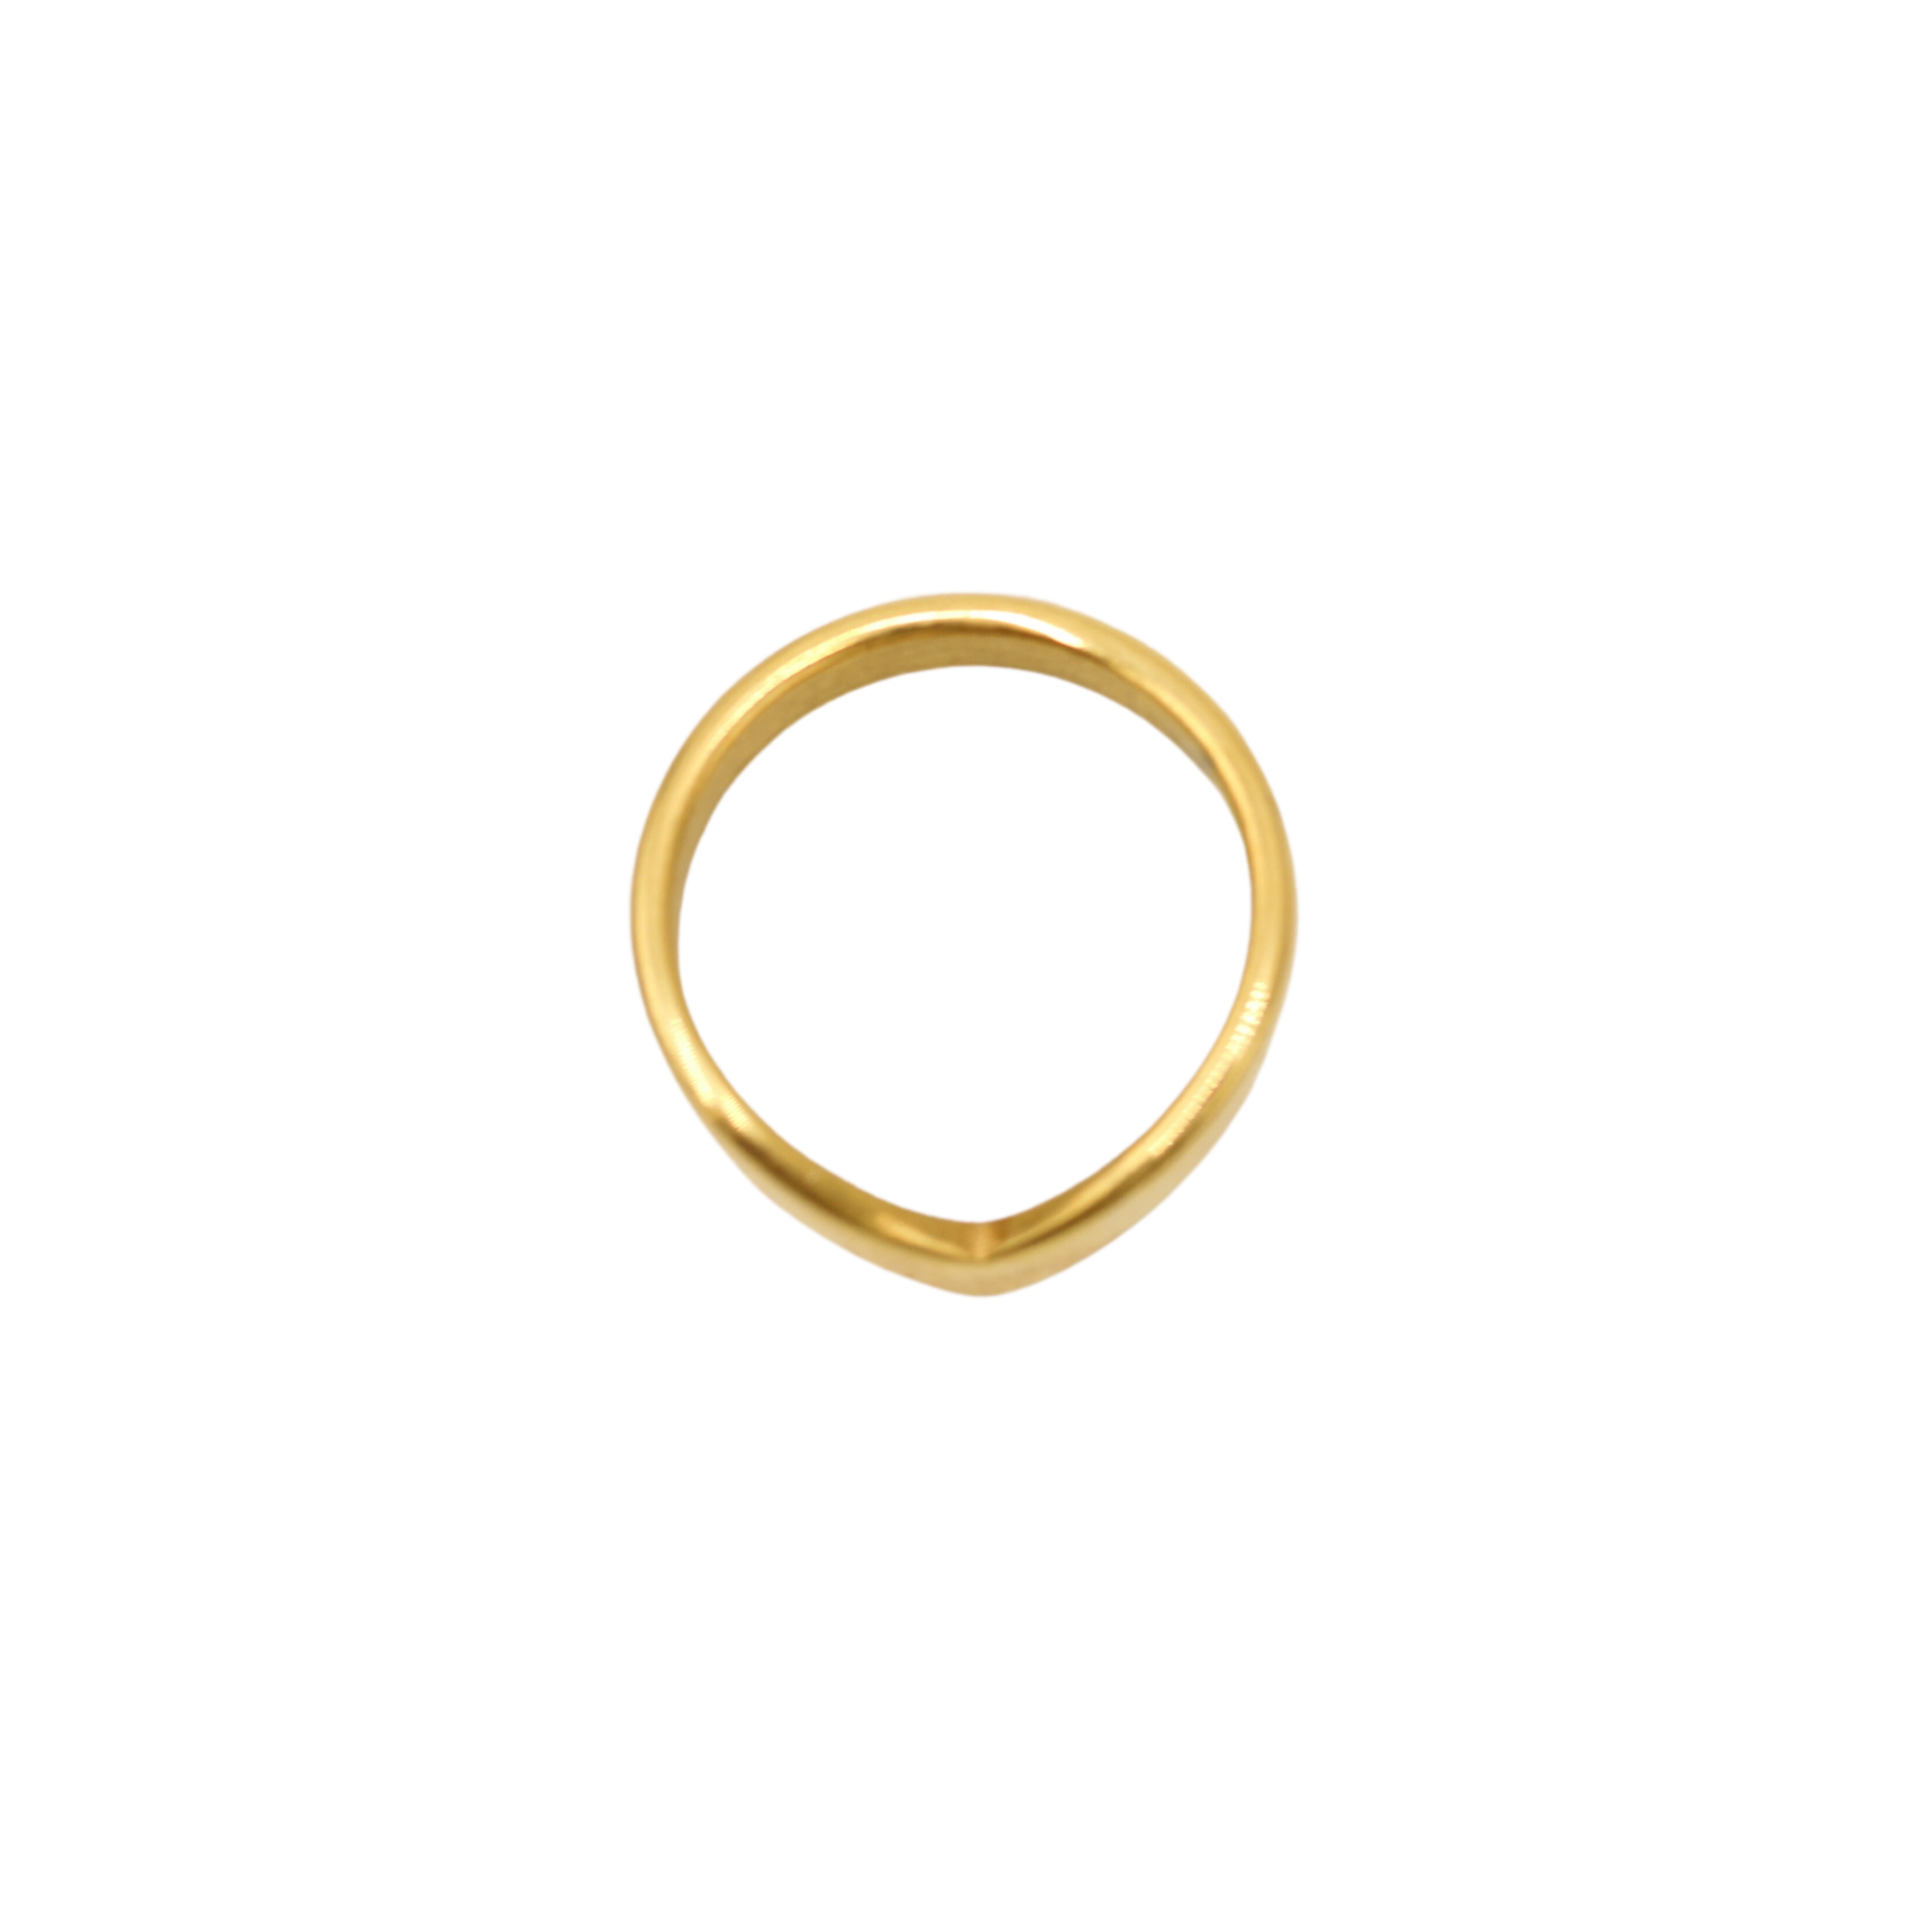 V-Shaped Ring Gold – The Created